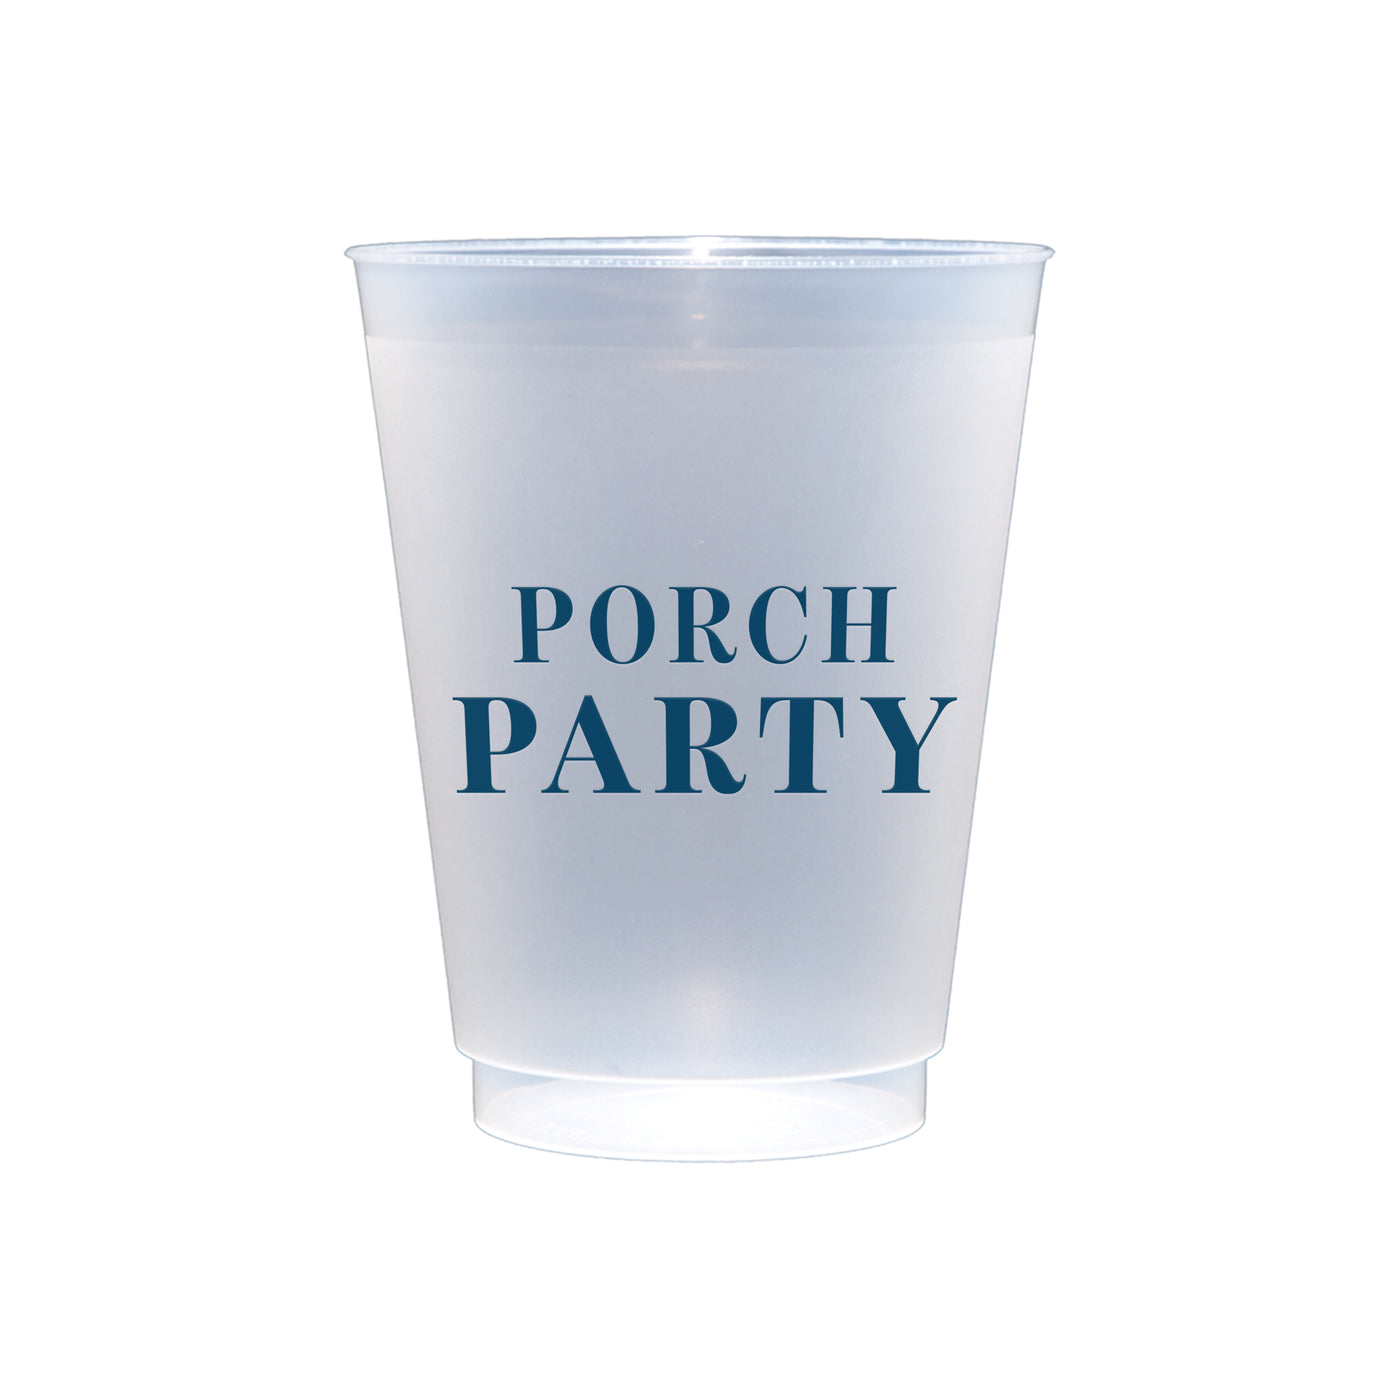 Porch Party Cups - Stack of 10